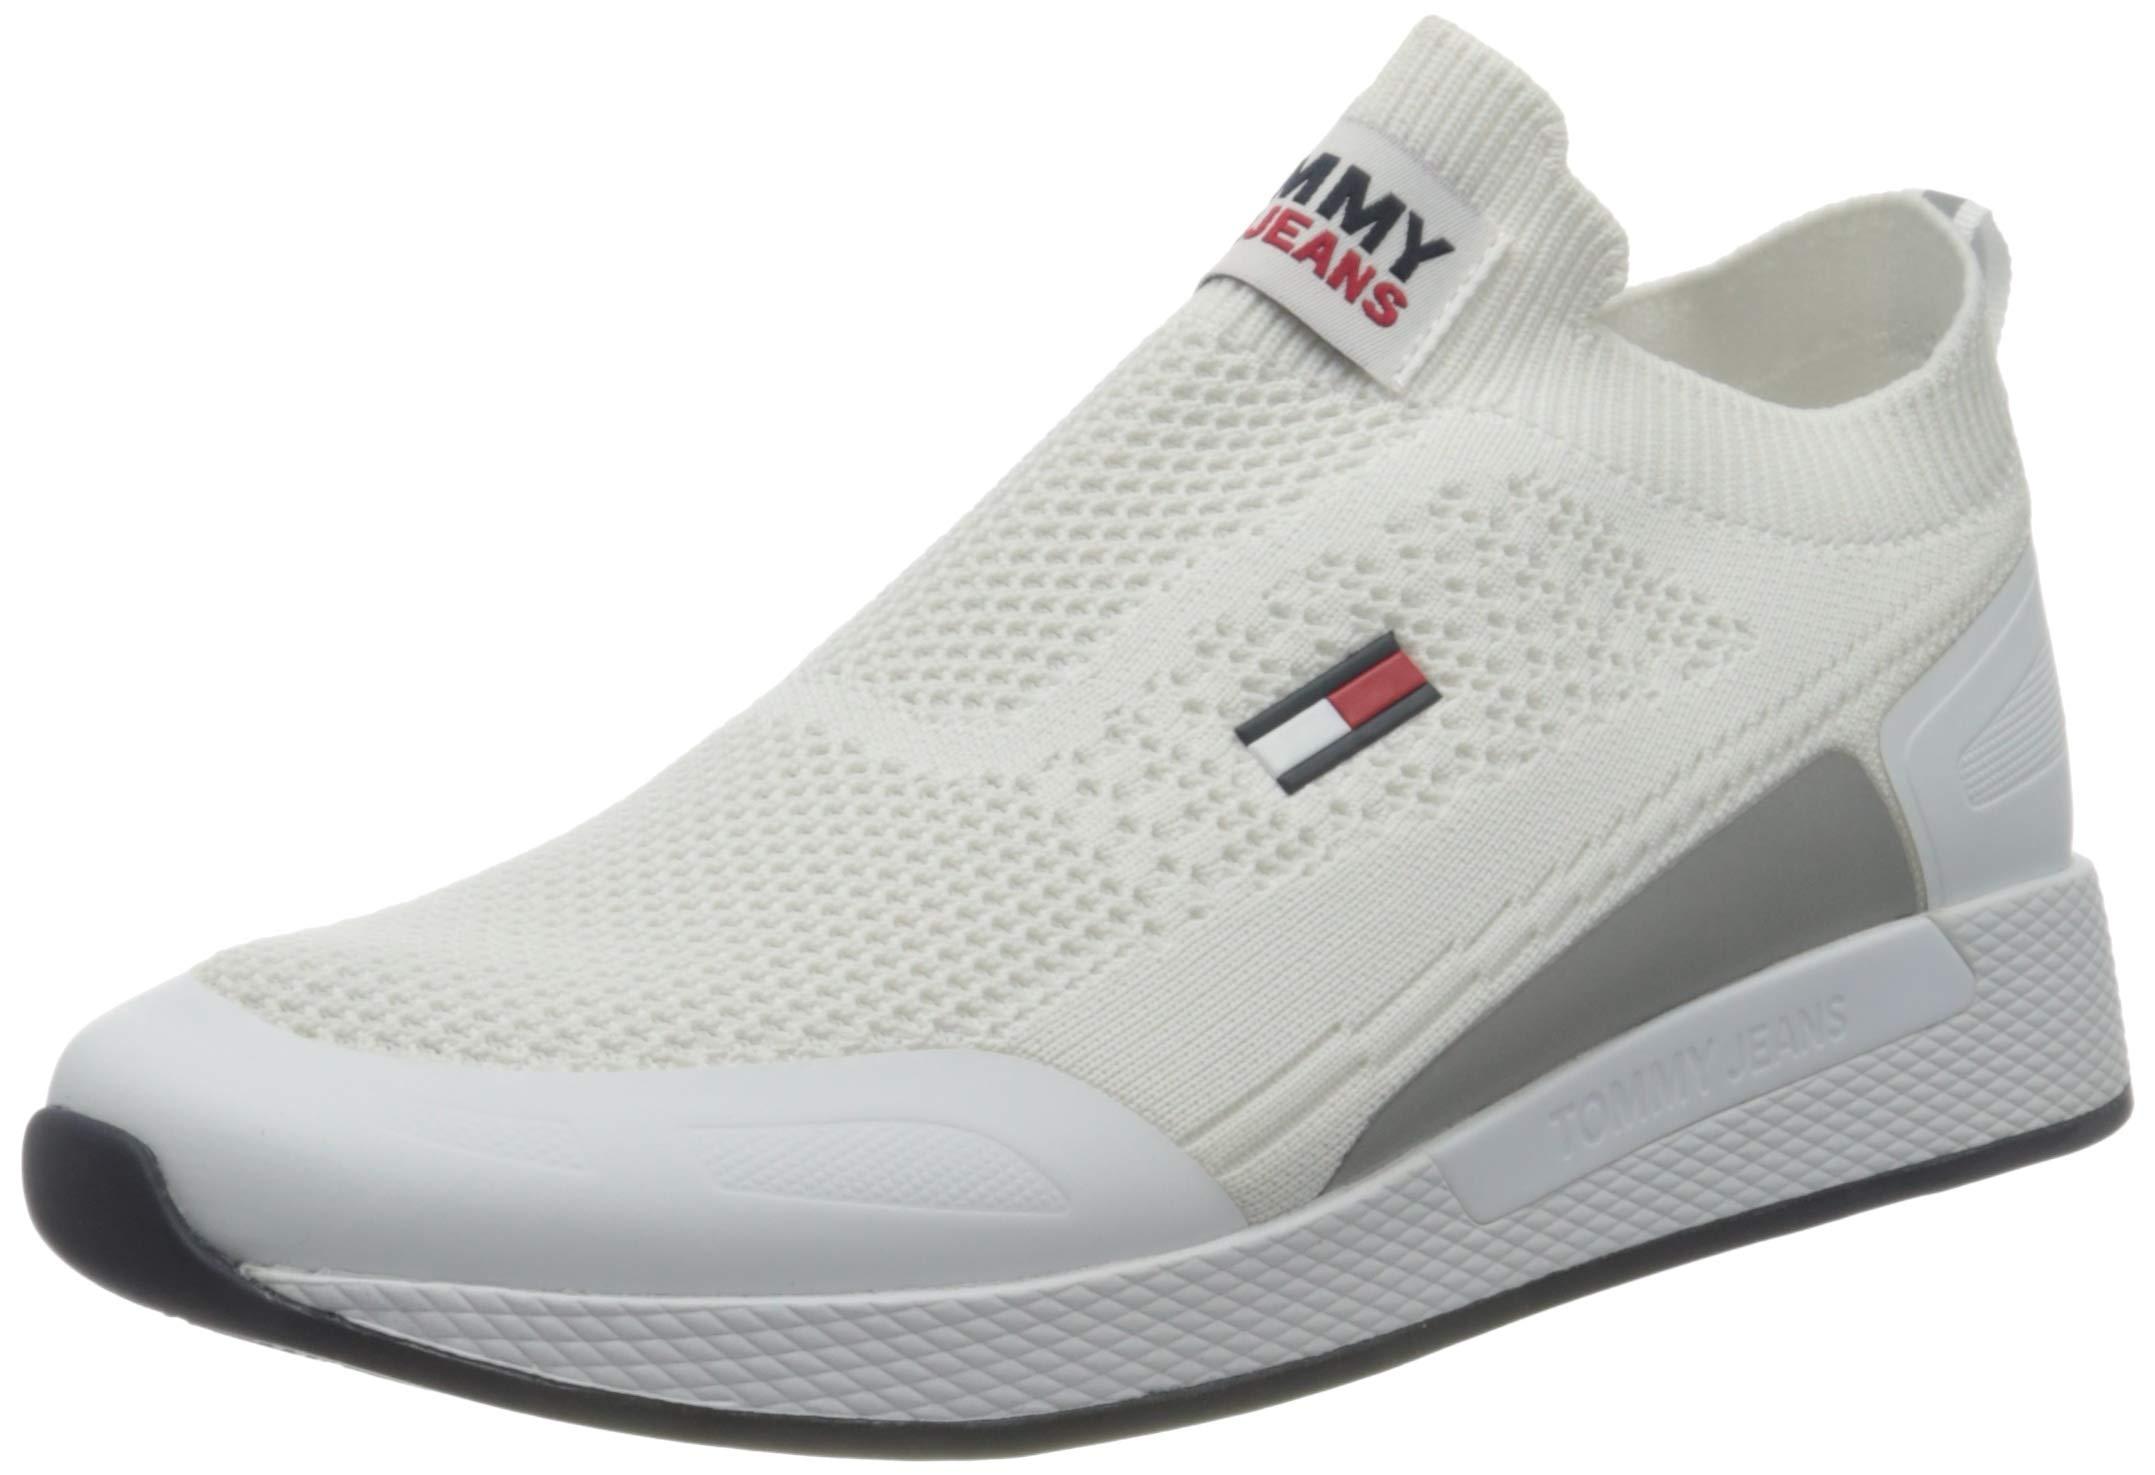 Tommy Hilfiger Flexi Sock Runner United Kingdom, SAVE 44% - aveclumiere.com